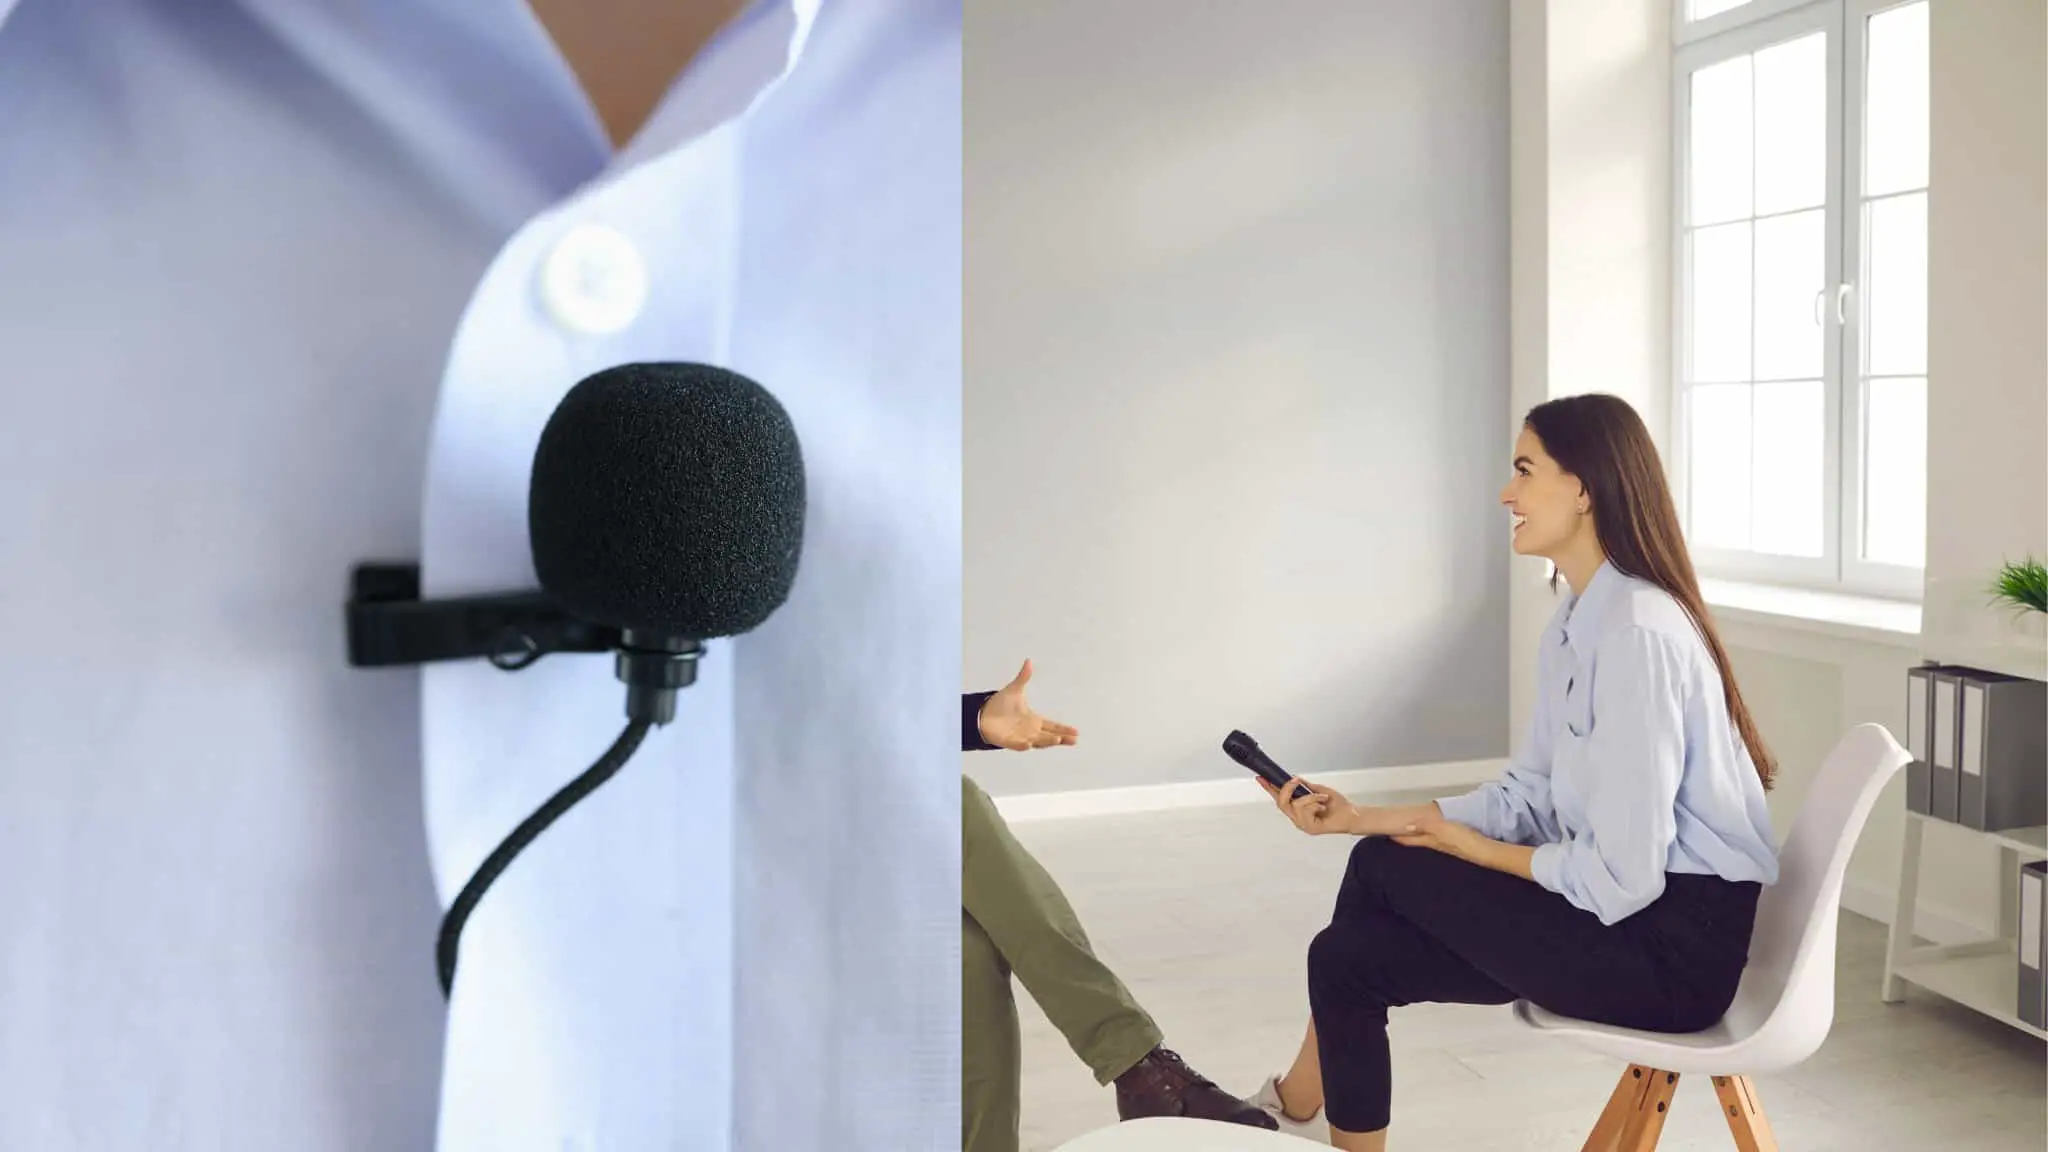 Lavalier Mic vs Handheld: Which is Better for Interviews?